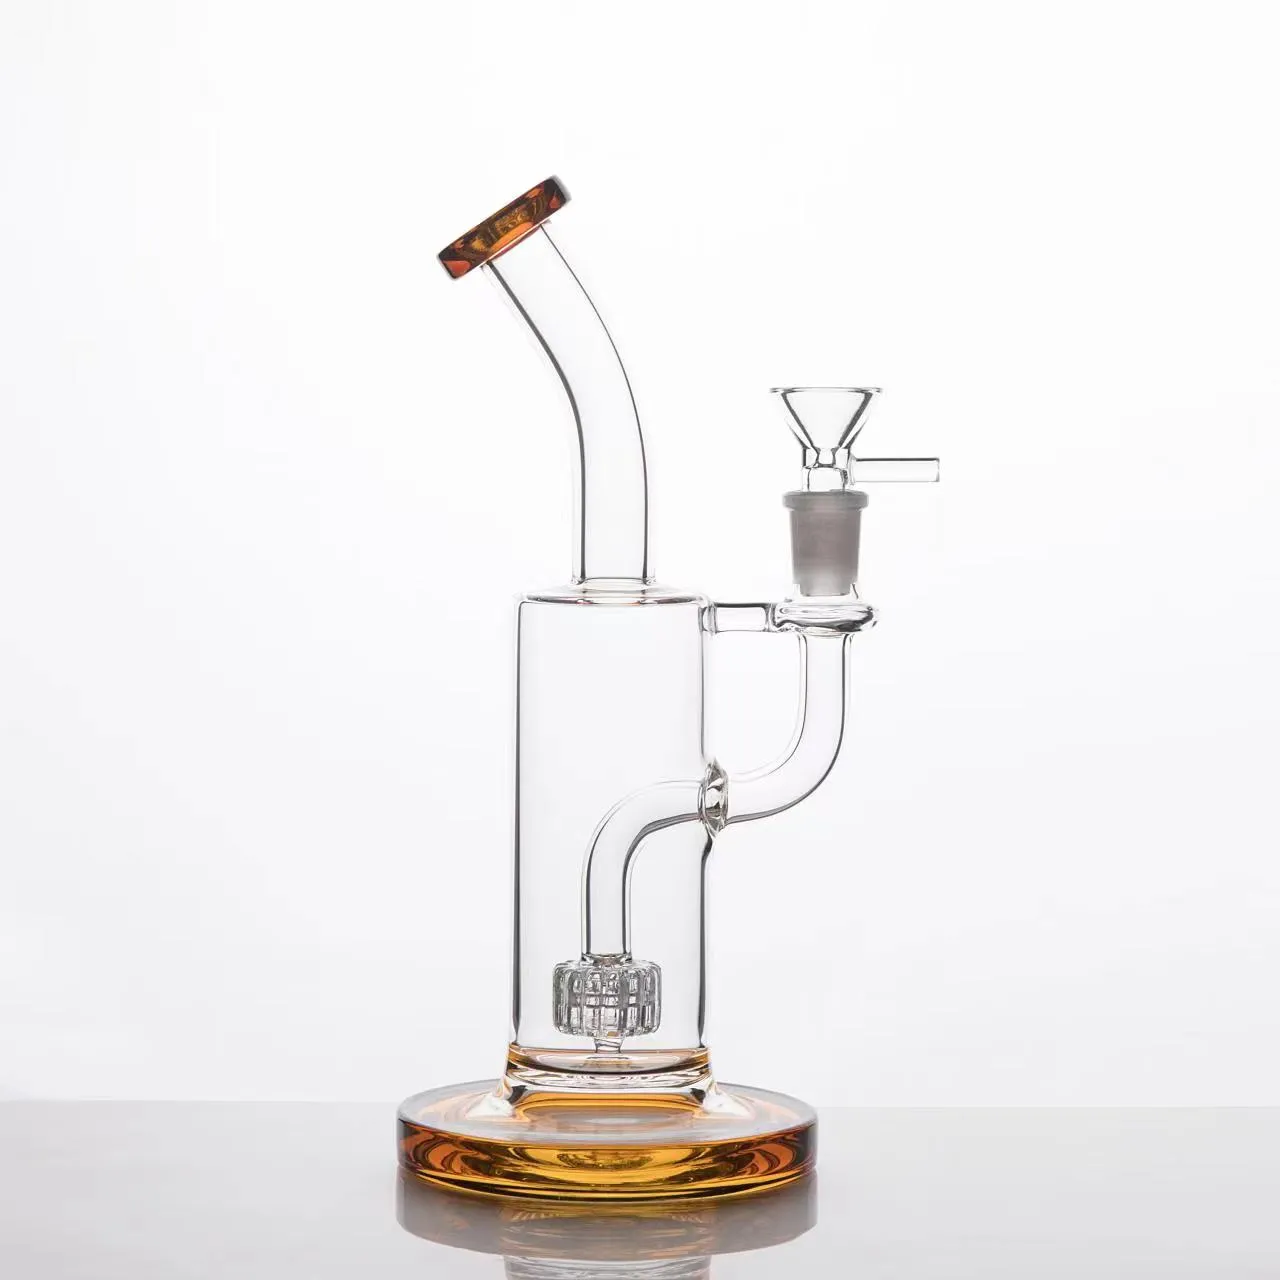 ash catcher Hookahs glass bong High Quality Yellow Bongs Lifebuoy Base Cyclone Percolator Bong Fristted Disc Oil rig bubbler water pipe Full height 9.4 inches